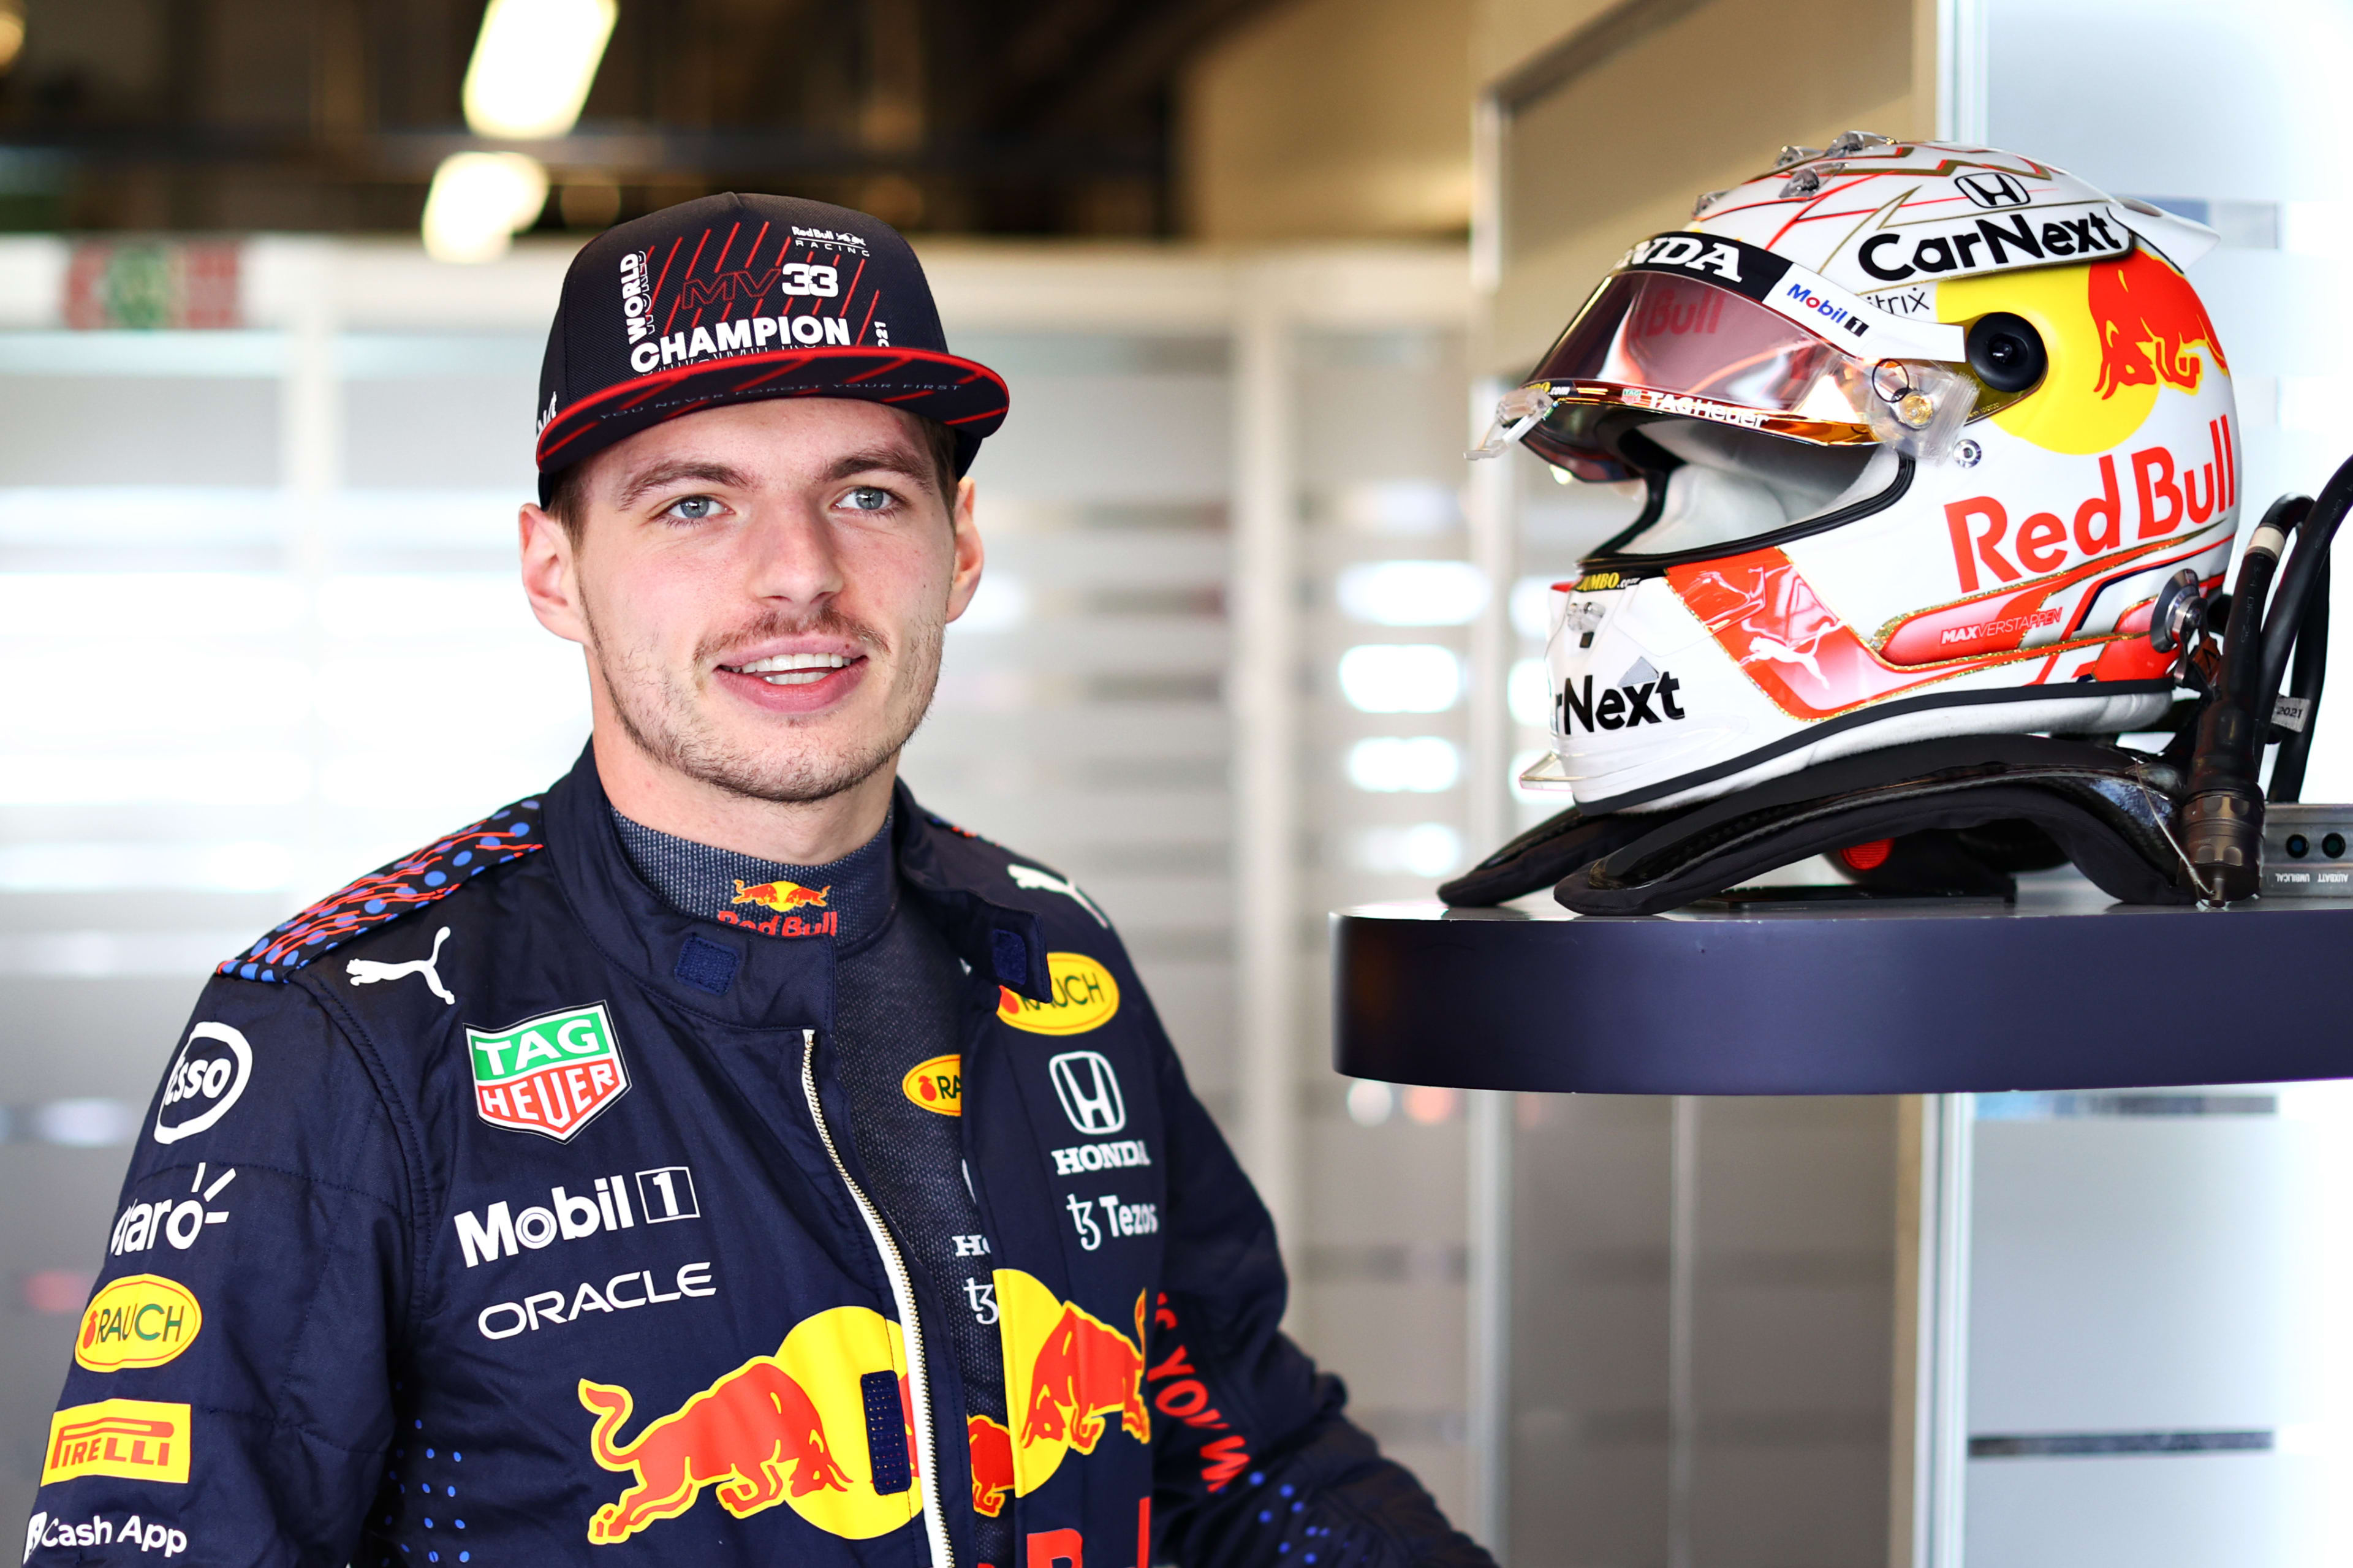 Verheugen Oordeel partitie Champion Max Verstappen to run No.1 on Red Bull in 2022 as he reveals  congratulations from Wolff and Hamilton| Formula 1